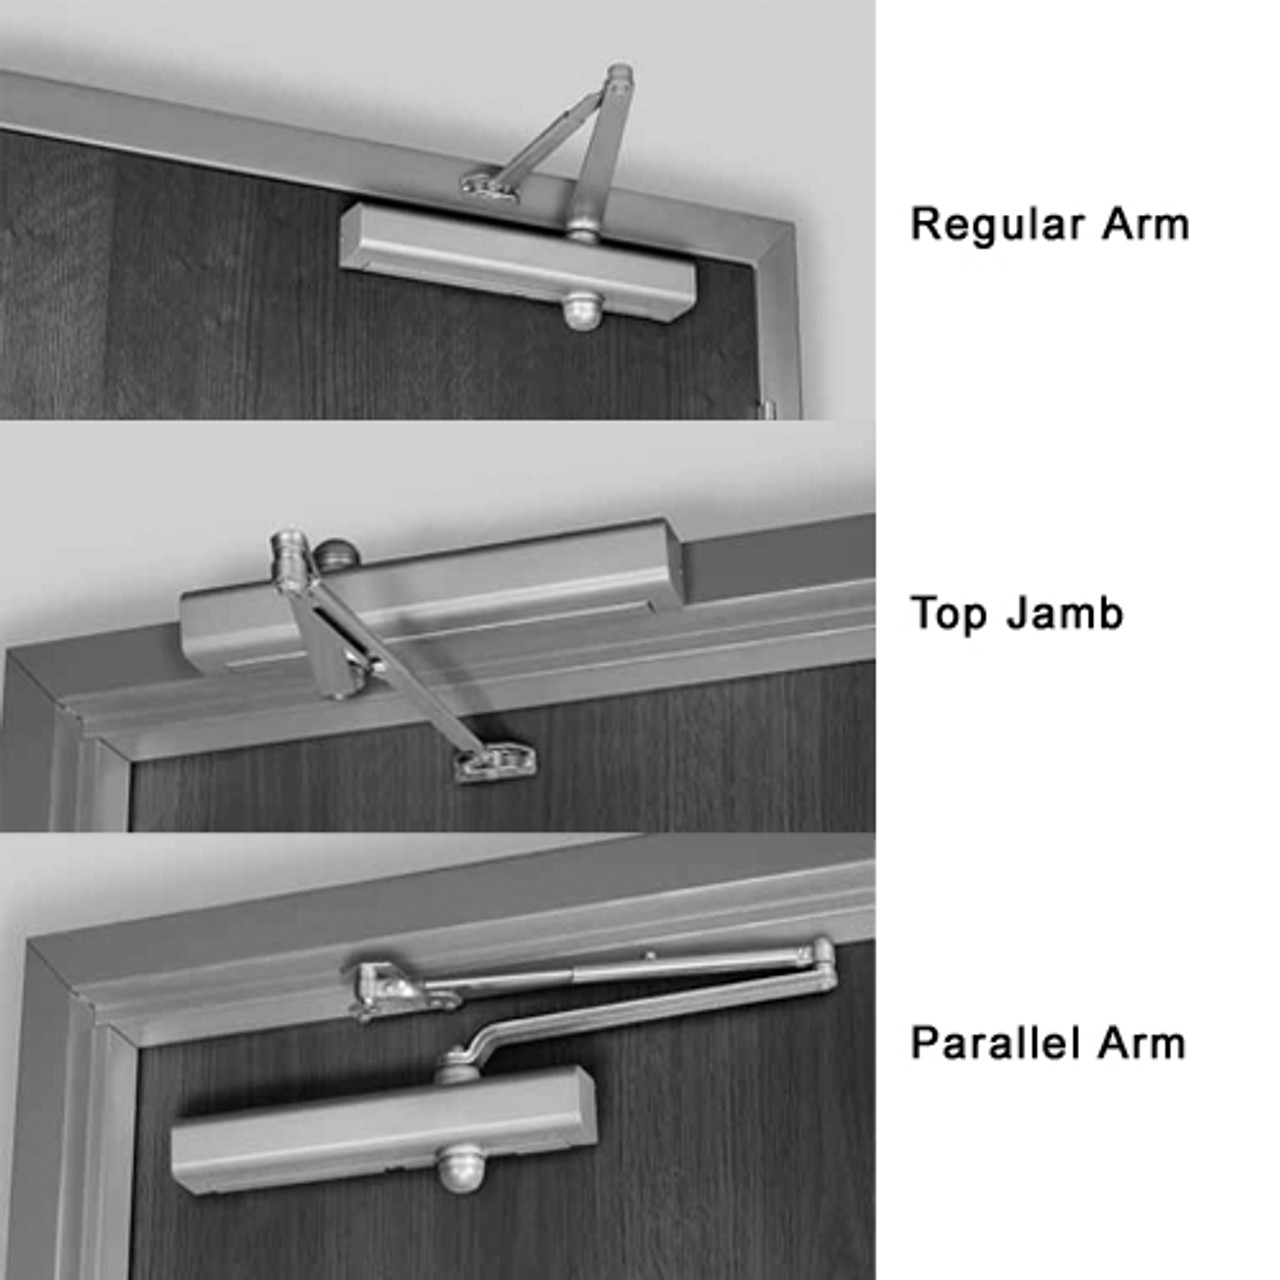 8501DA-691 Norton 8000 Series Full Cover Non-Hold Open Door Closers with Regular Parallel and Top Jamb to 3 inch Reveal in Dull Bronze Finish